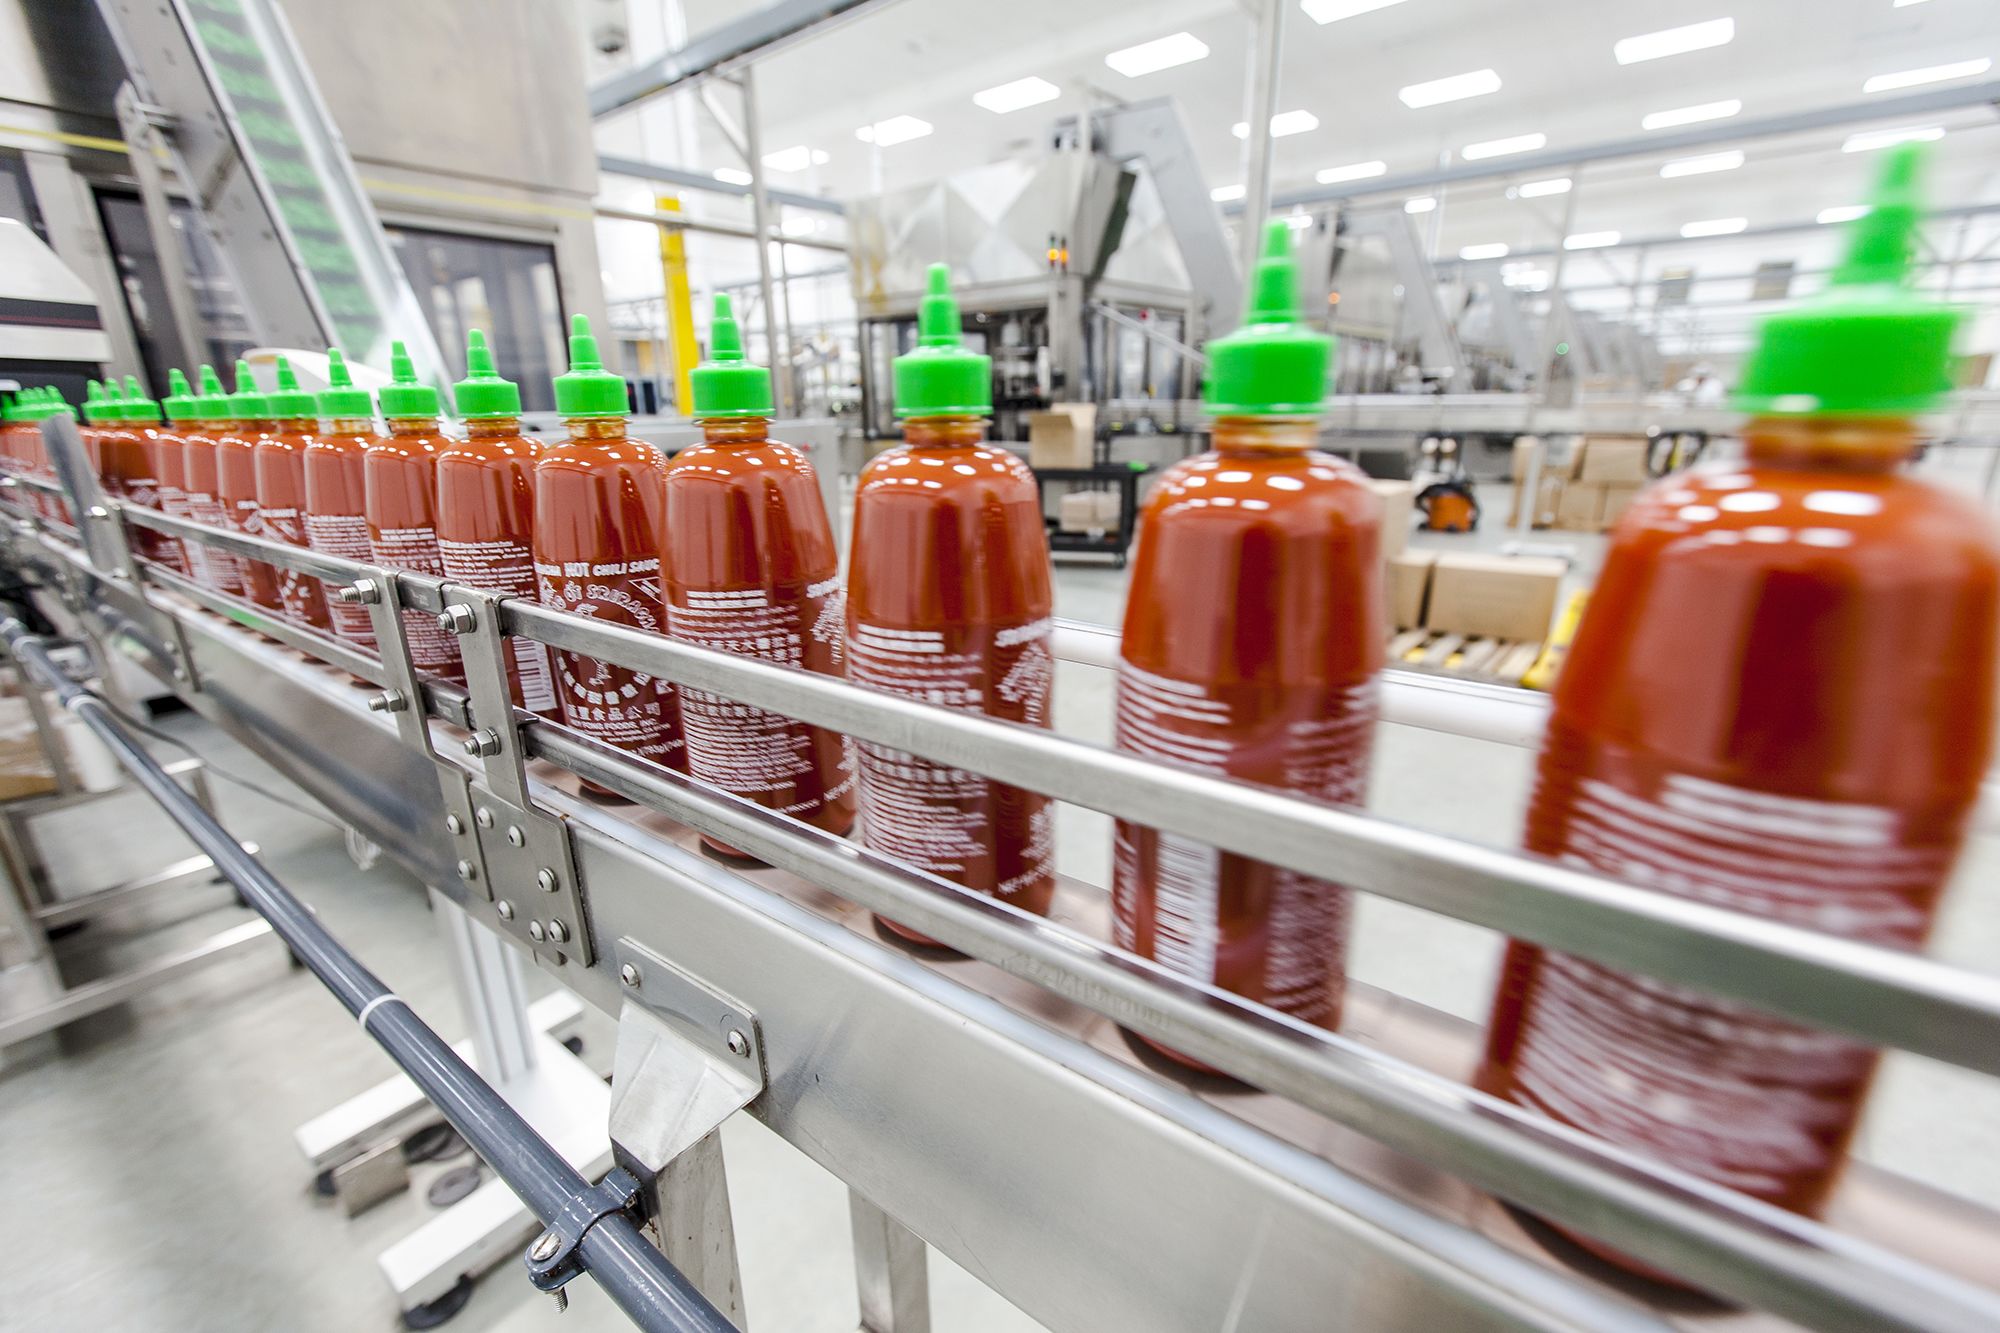 Is There Really A Sriracha Shortage? - The New York Times